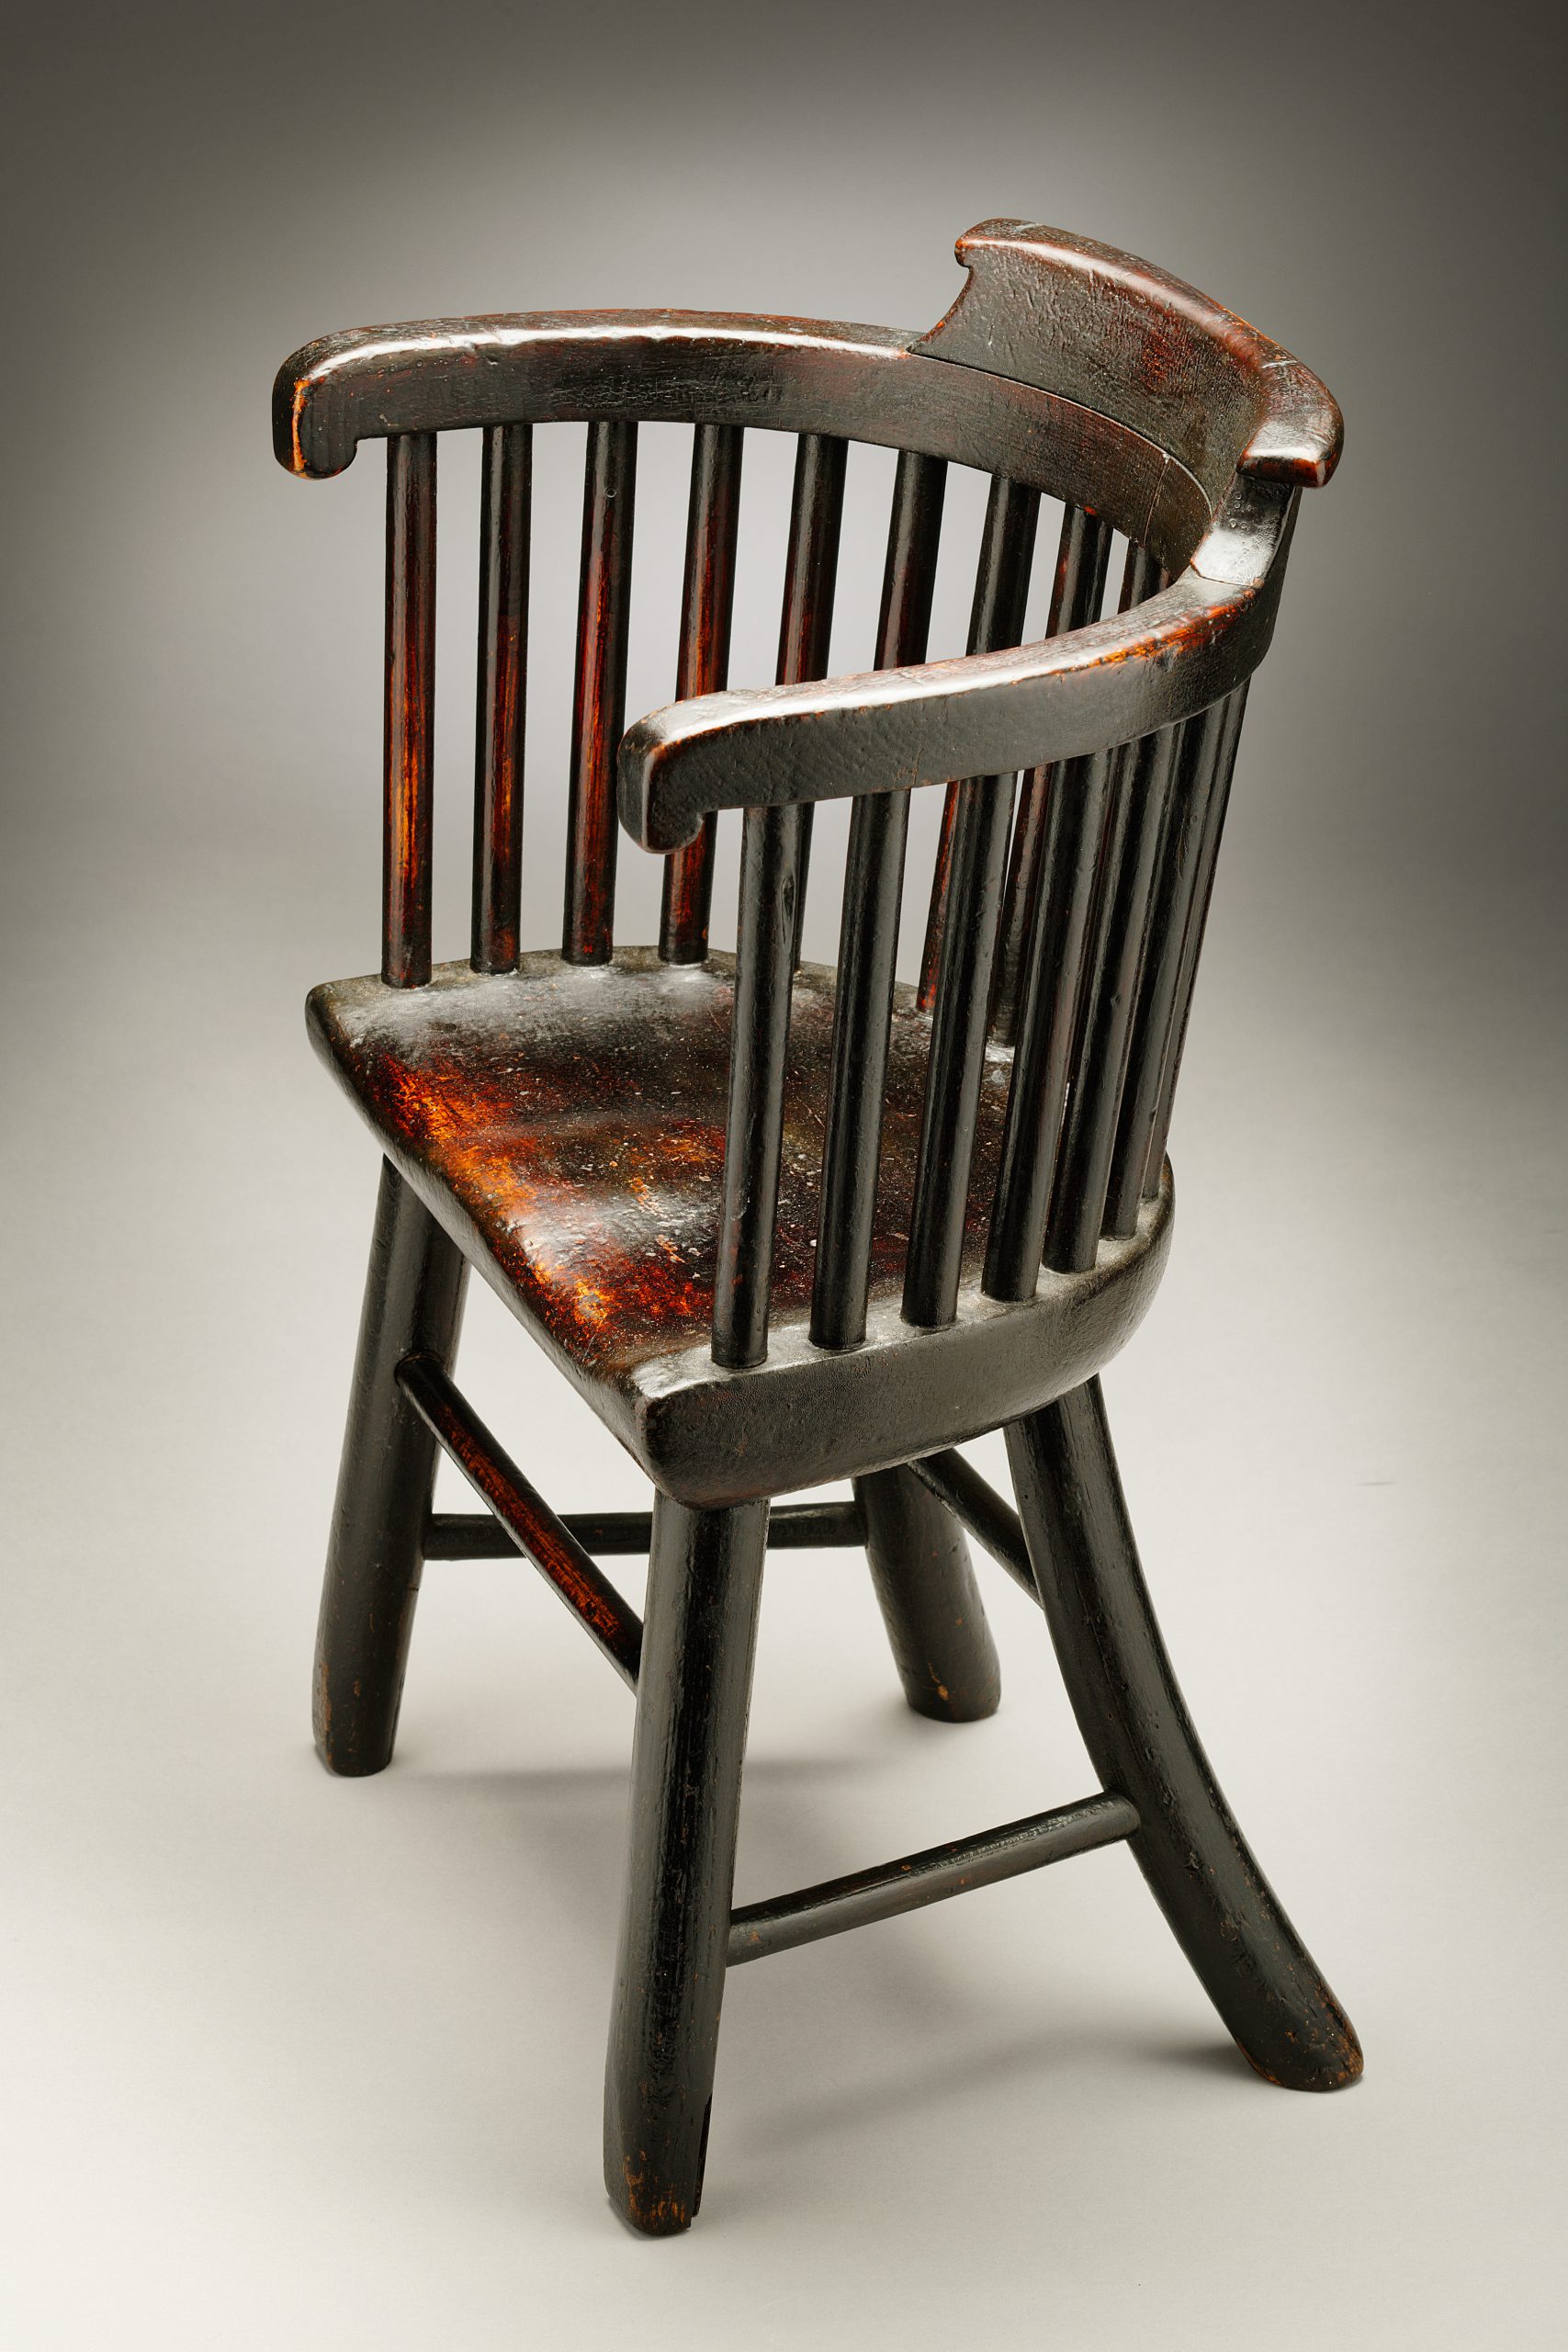 Image of A Painted Child’s Chair